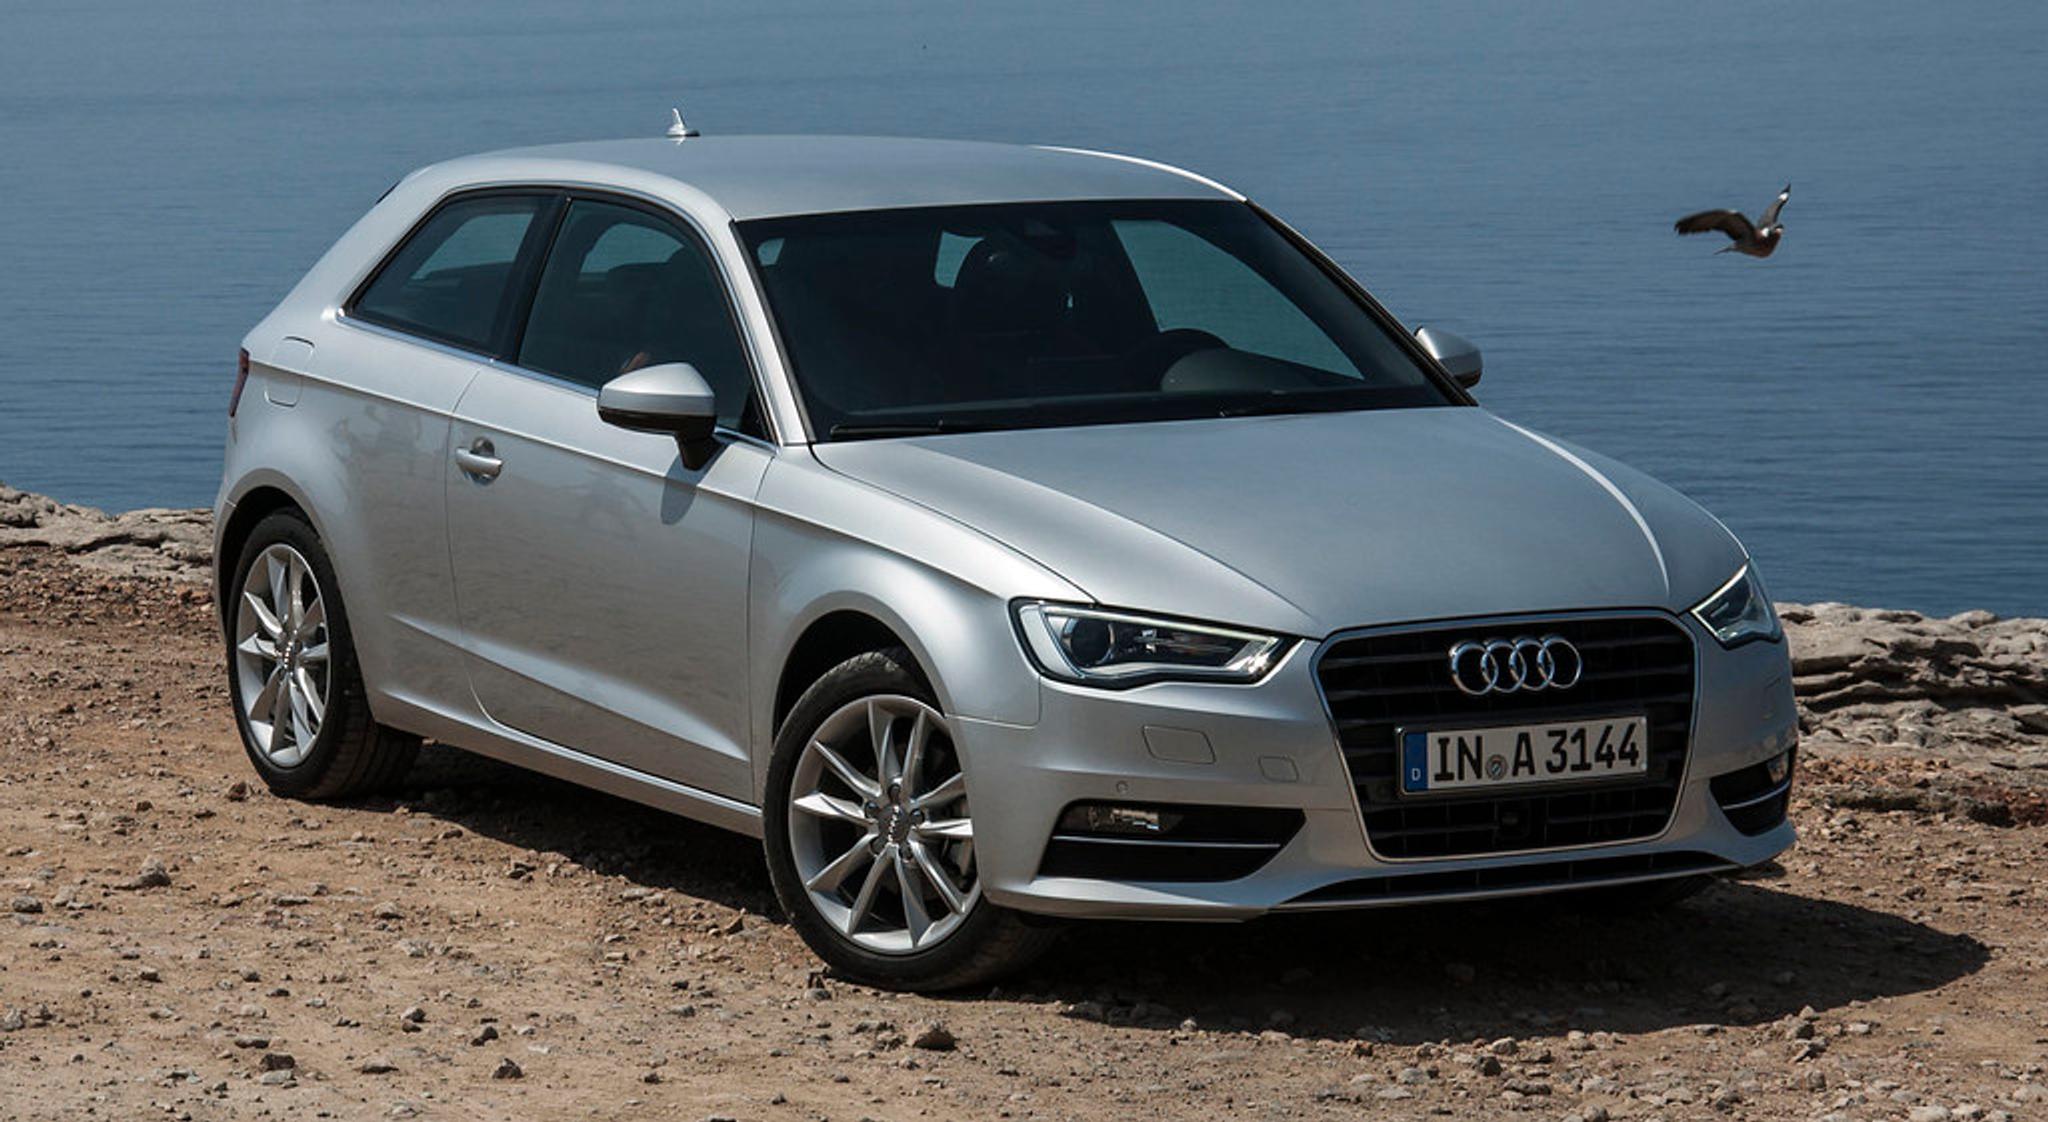 Silver Audi A3 next to the ocean